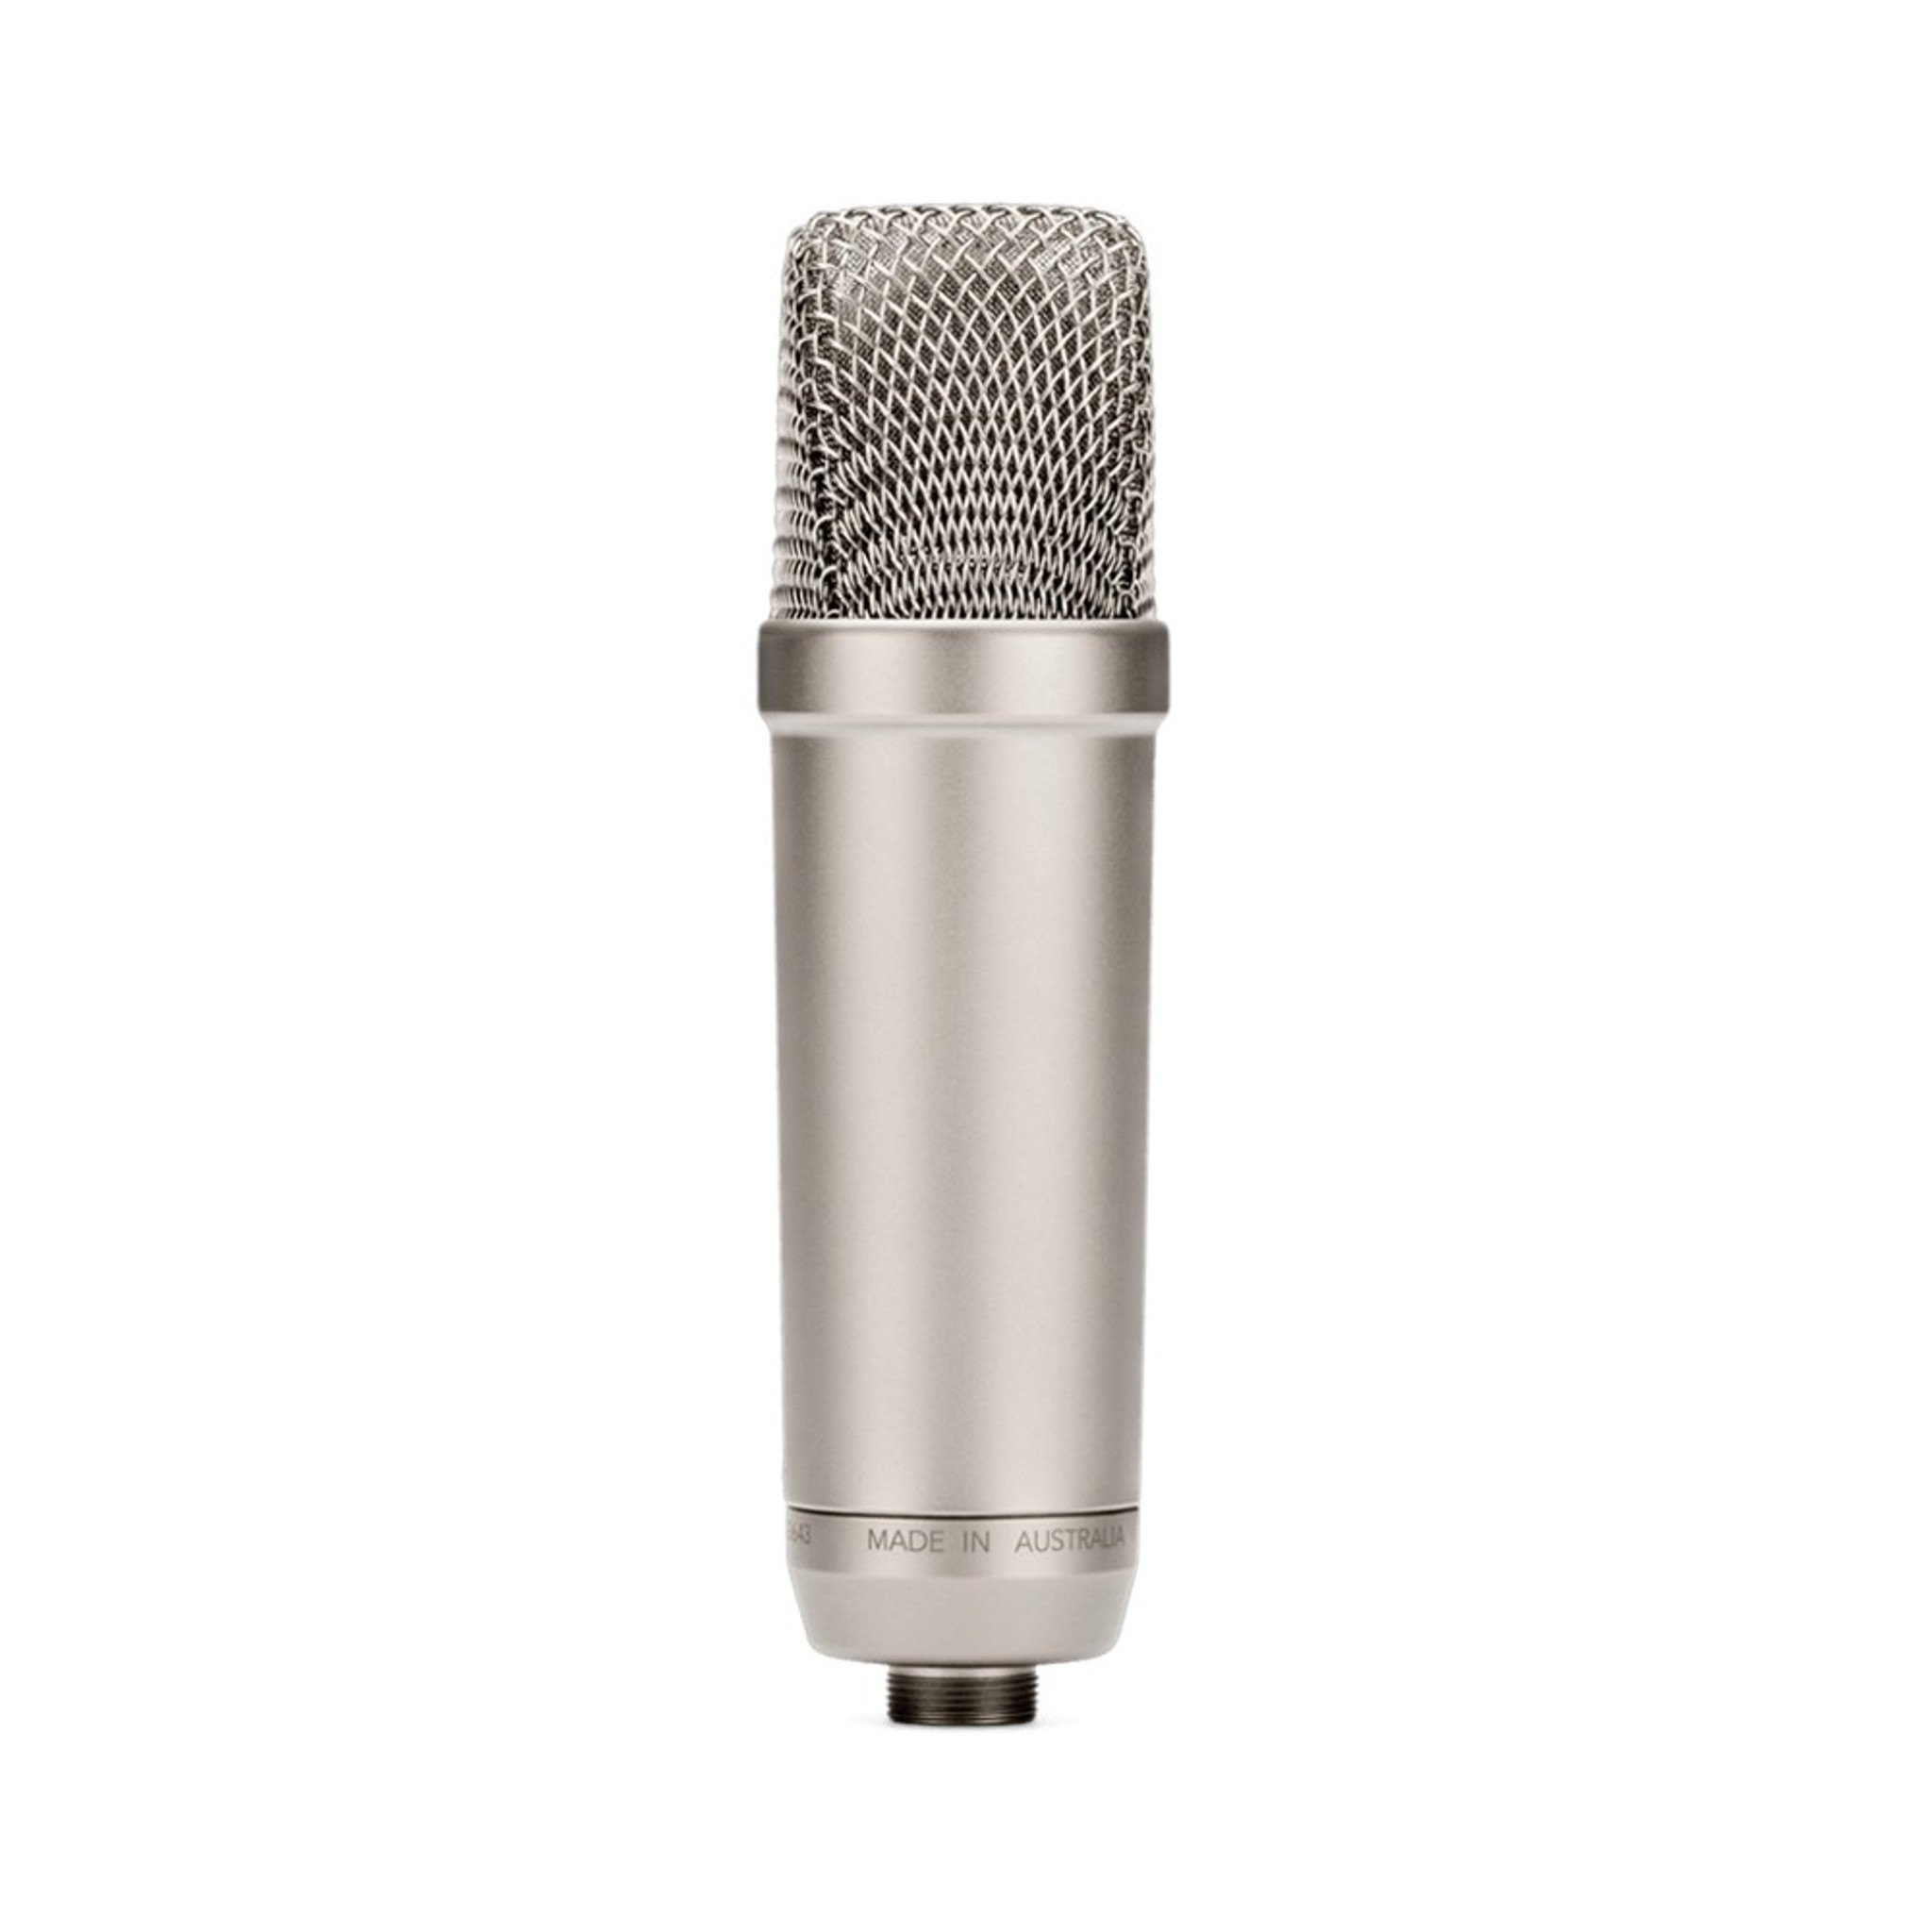 RODE NT1-A LARGE DIAPHRAGM CARDIOID CONDENSER MICROPHONE I SEAMUSICIAN